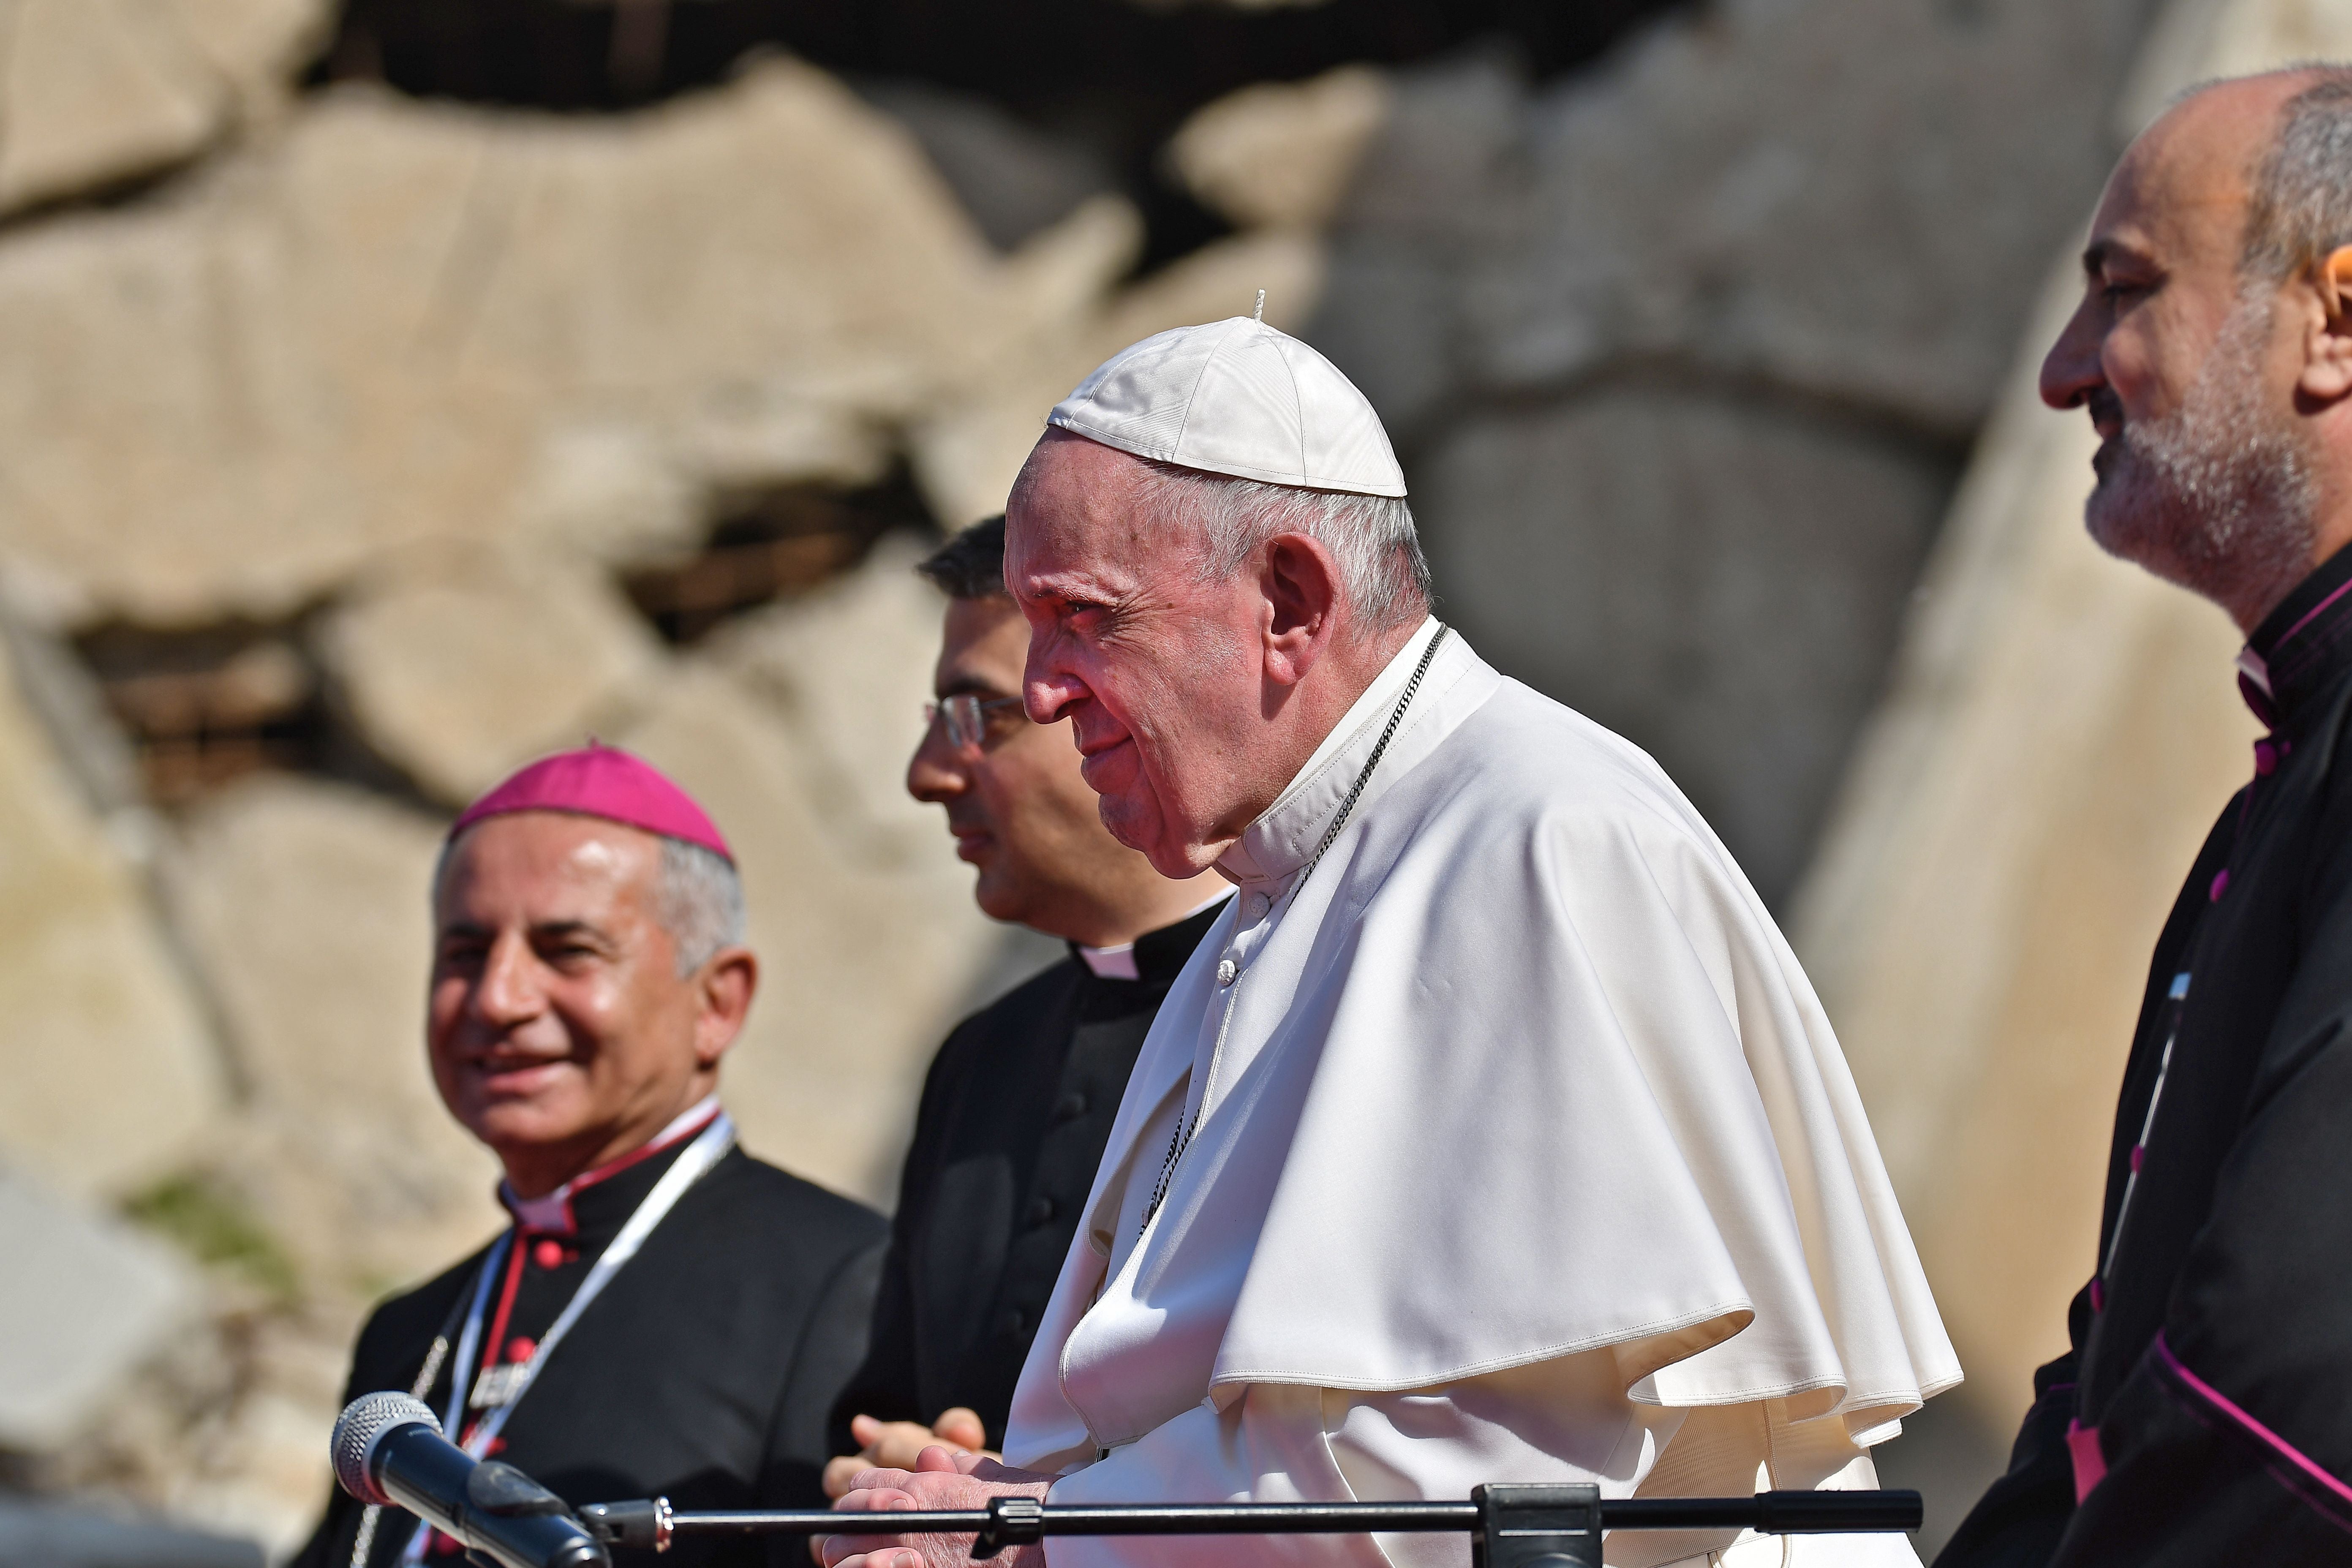 The visit by the Pope means a great deal to those who are trying to rebuild the Christian community